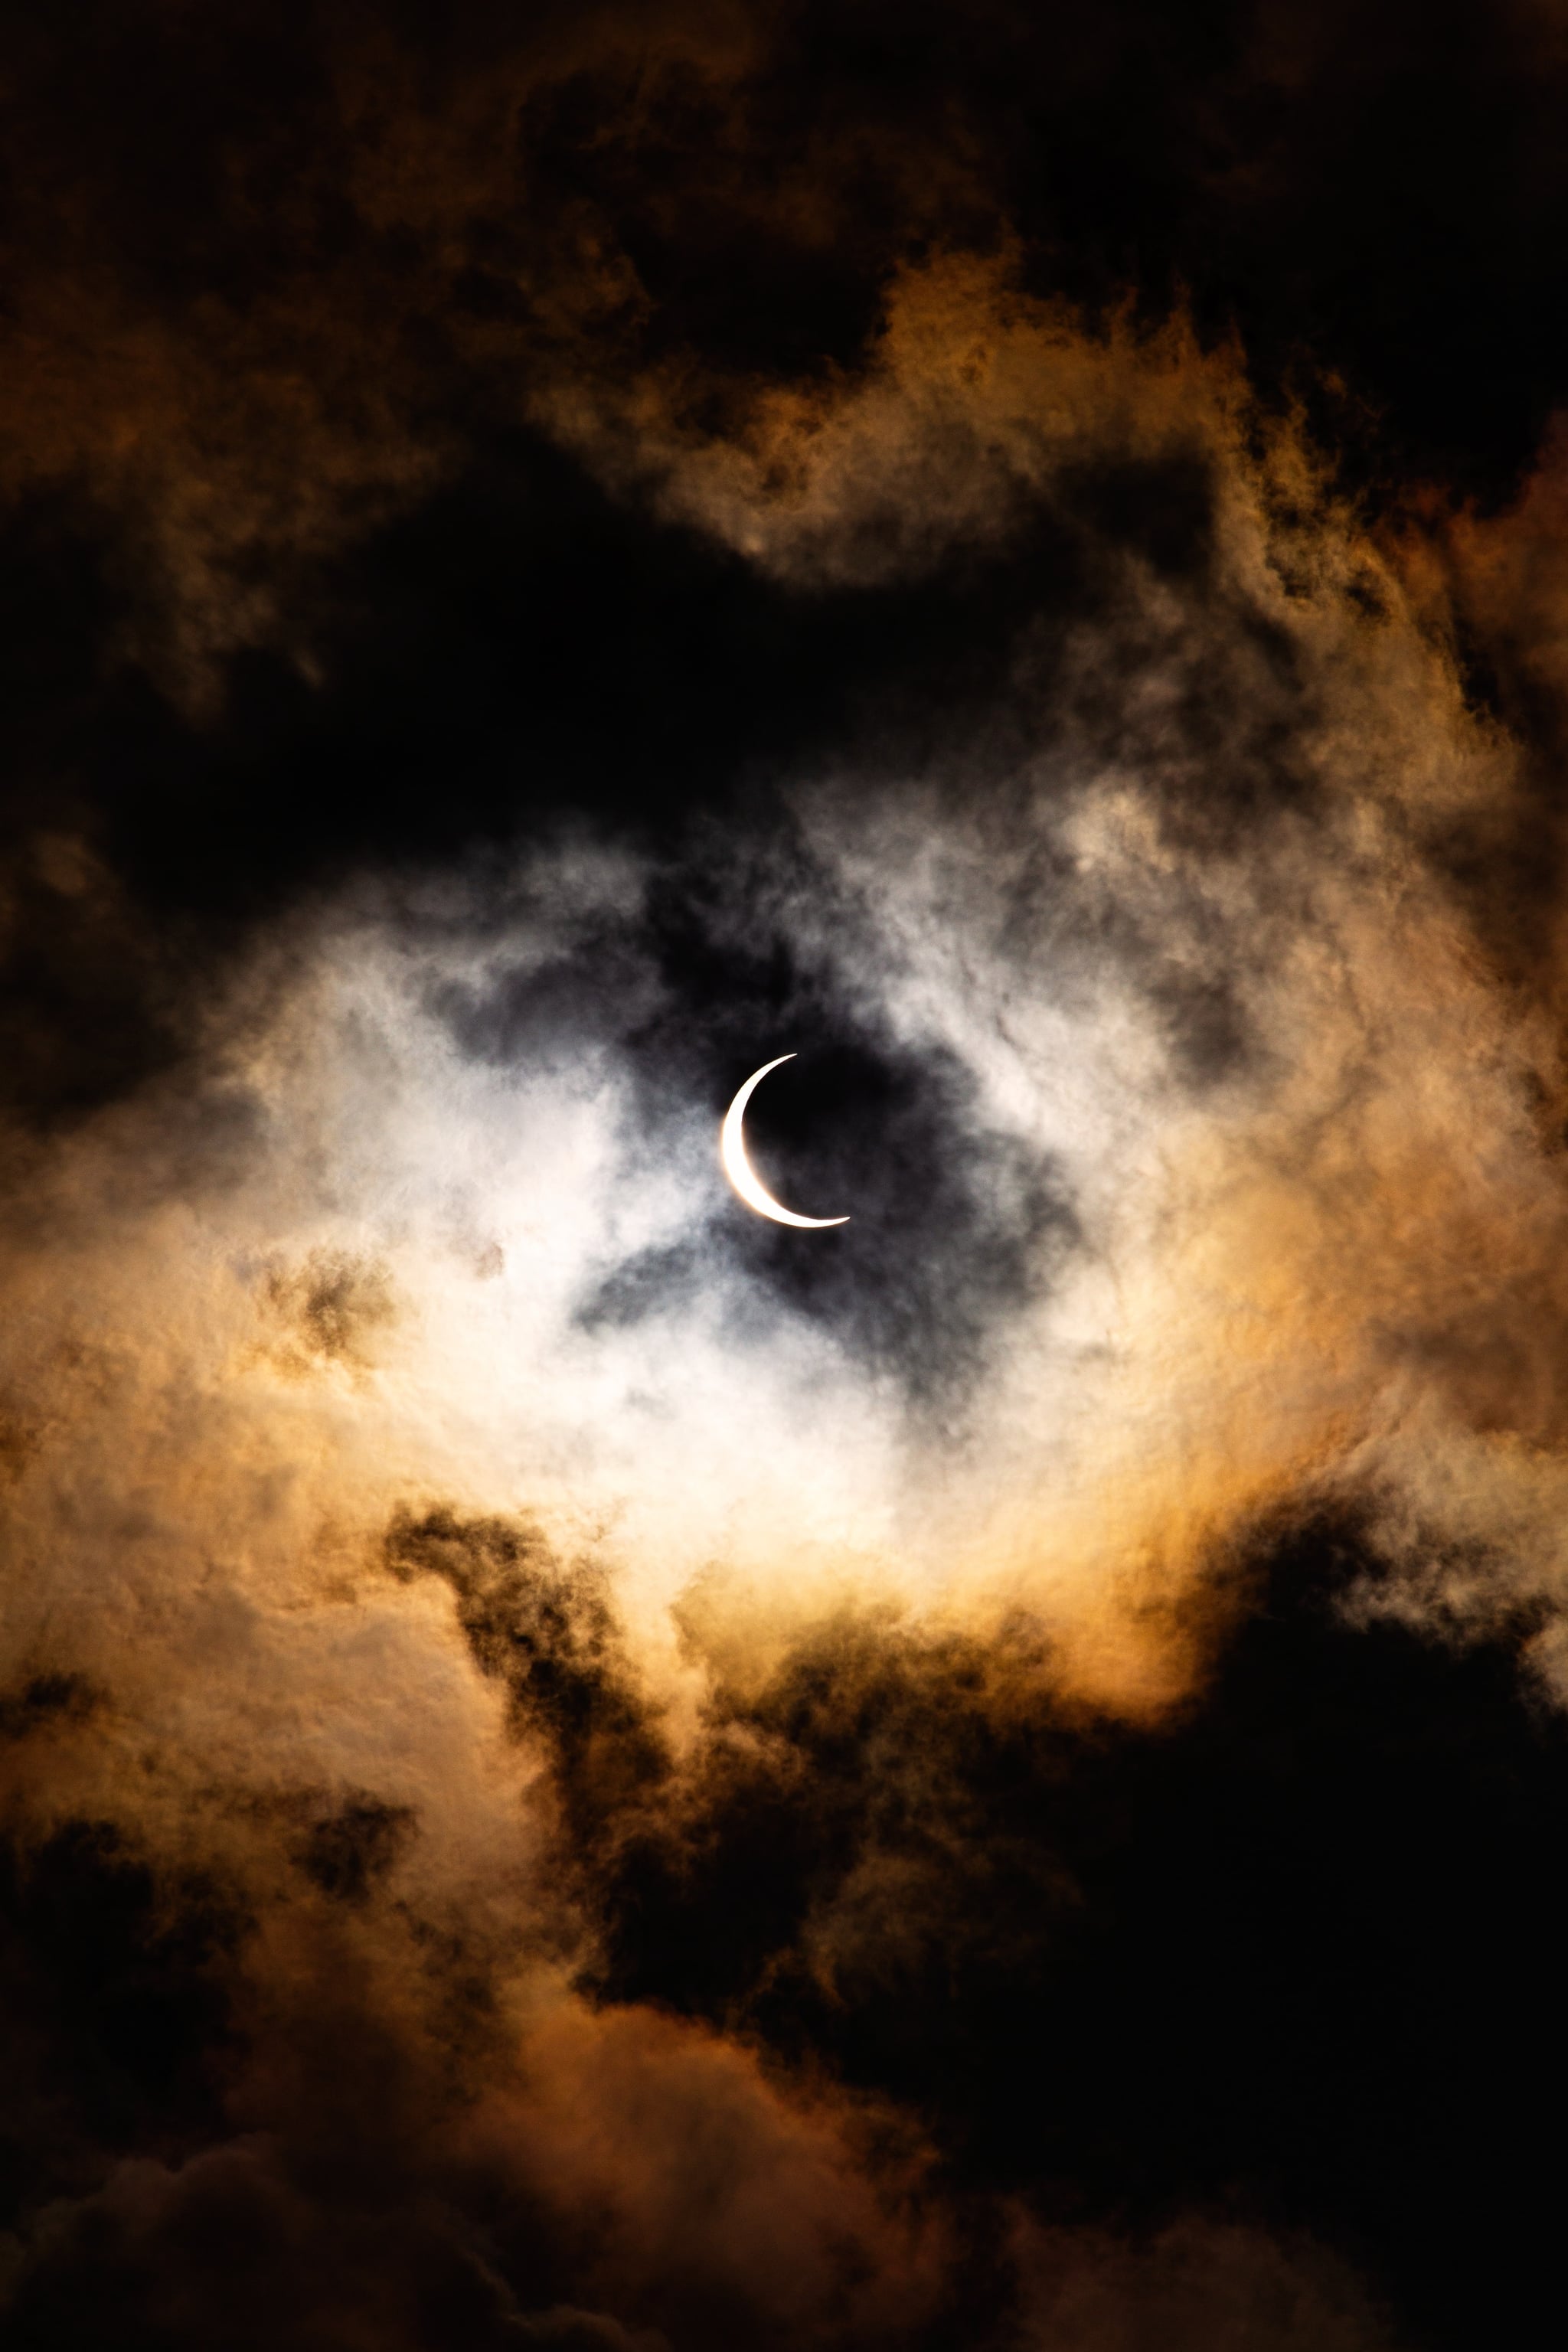 A crescent moon is partially obscured by clouds. - Creepy, spooky